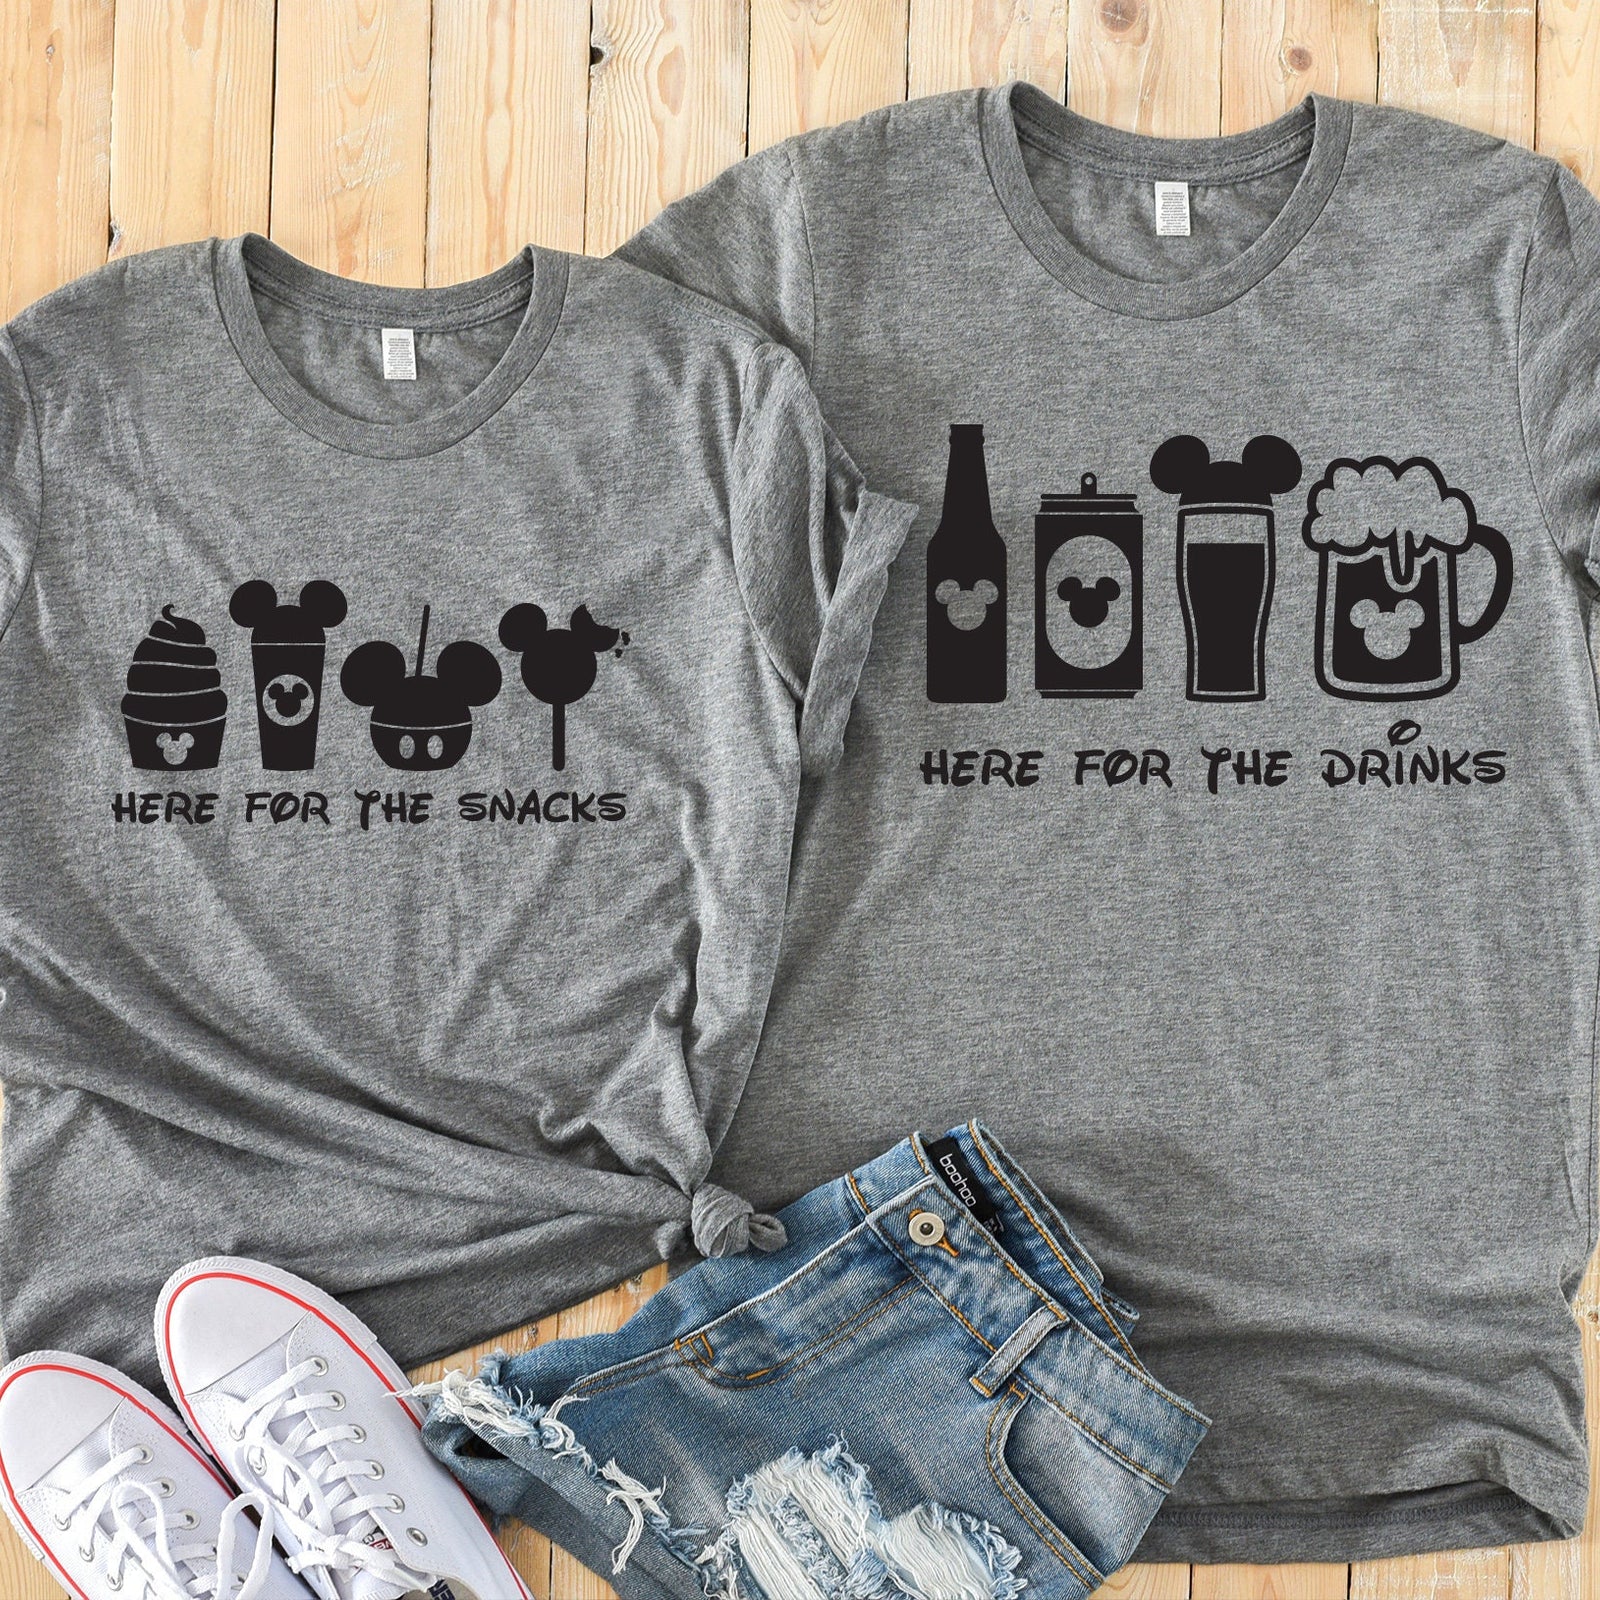 Here for the Snacks and Here for the Drinks - Funny Disney Couples Shirt - Matching Disney Shirts -Snack Goals